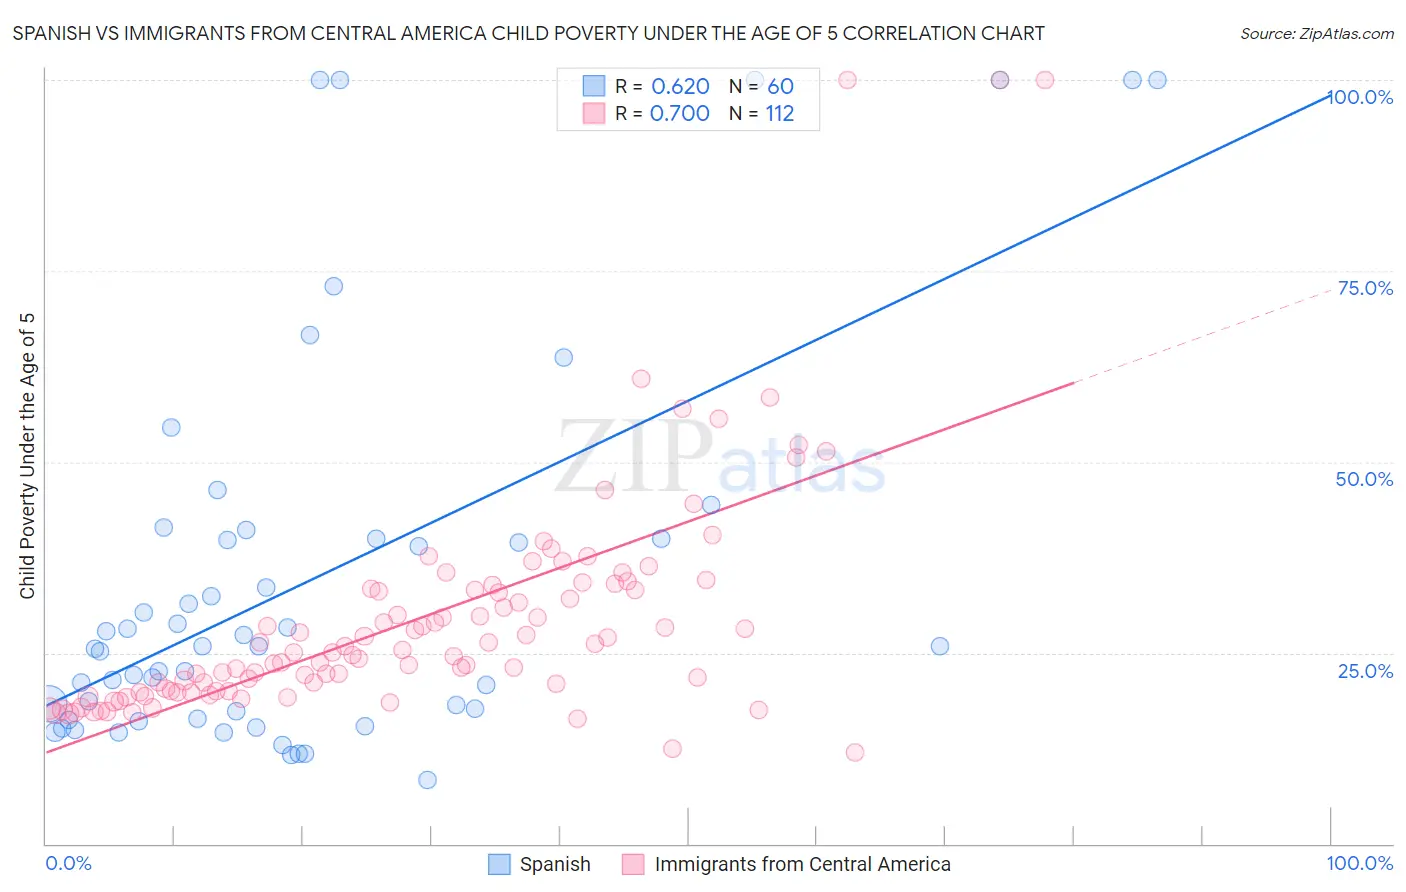 Spanish vs Immigrants from Central America Child Poverty Under the Age of 5